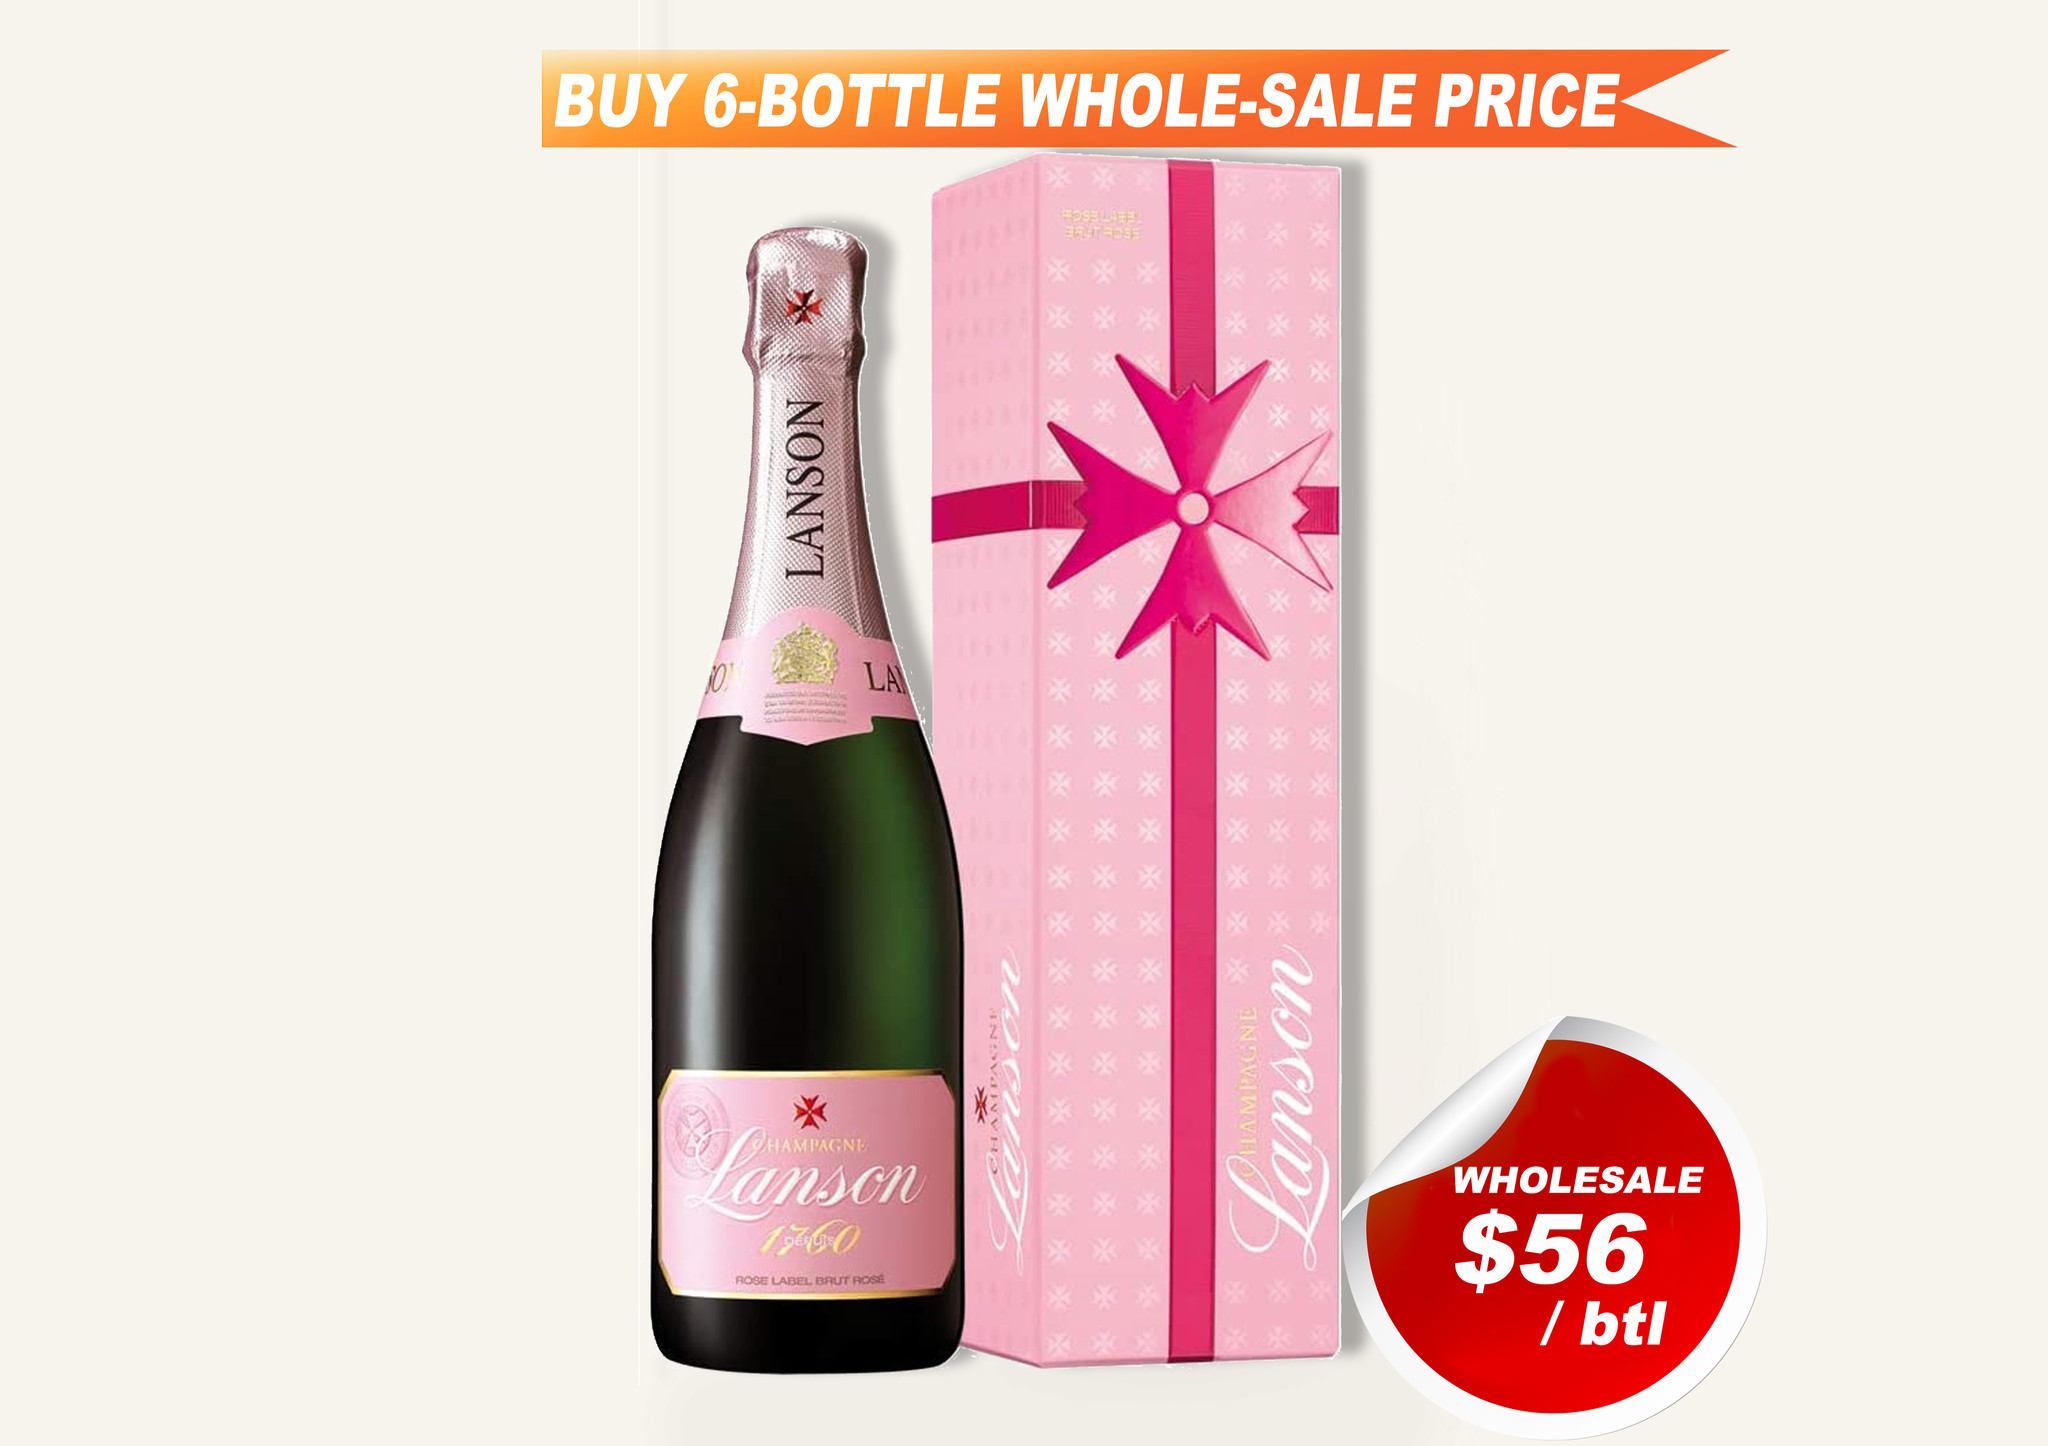 Brut NV Rose - Fossil DELIVERY Uncle box Gift Wine&Spirits FREE $56 Lanson